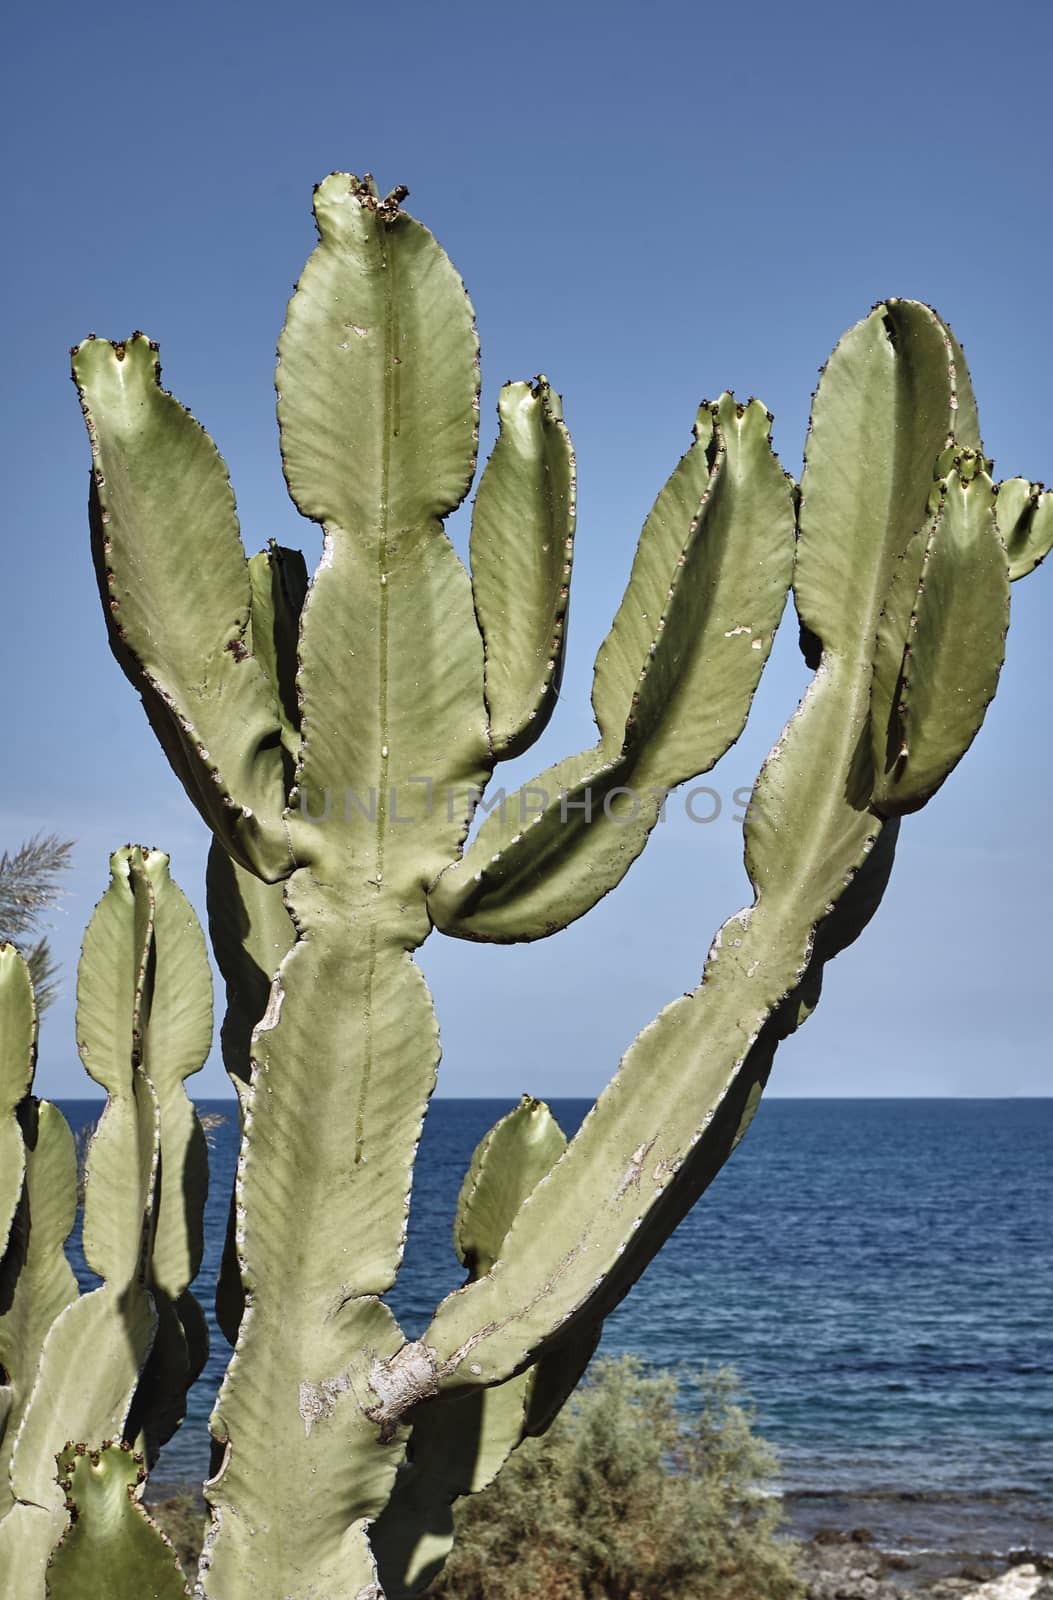 Prickly Pear Cactus growing on the sea on the island of Crete